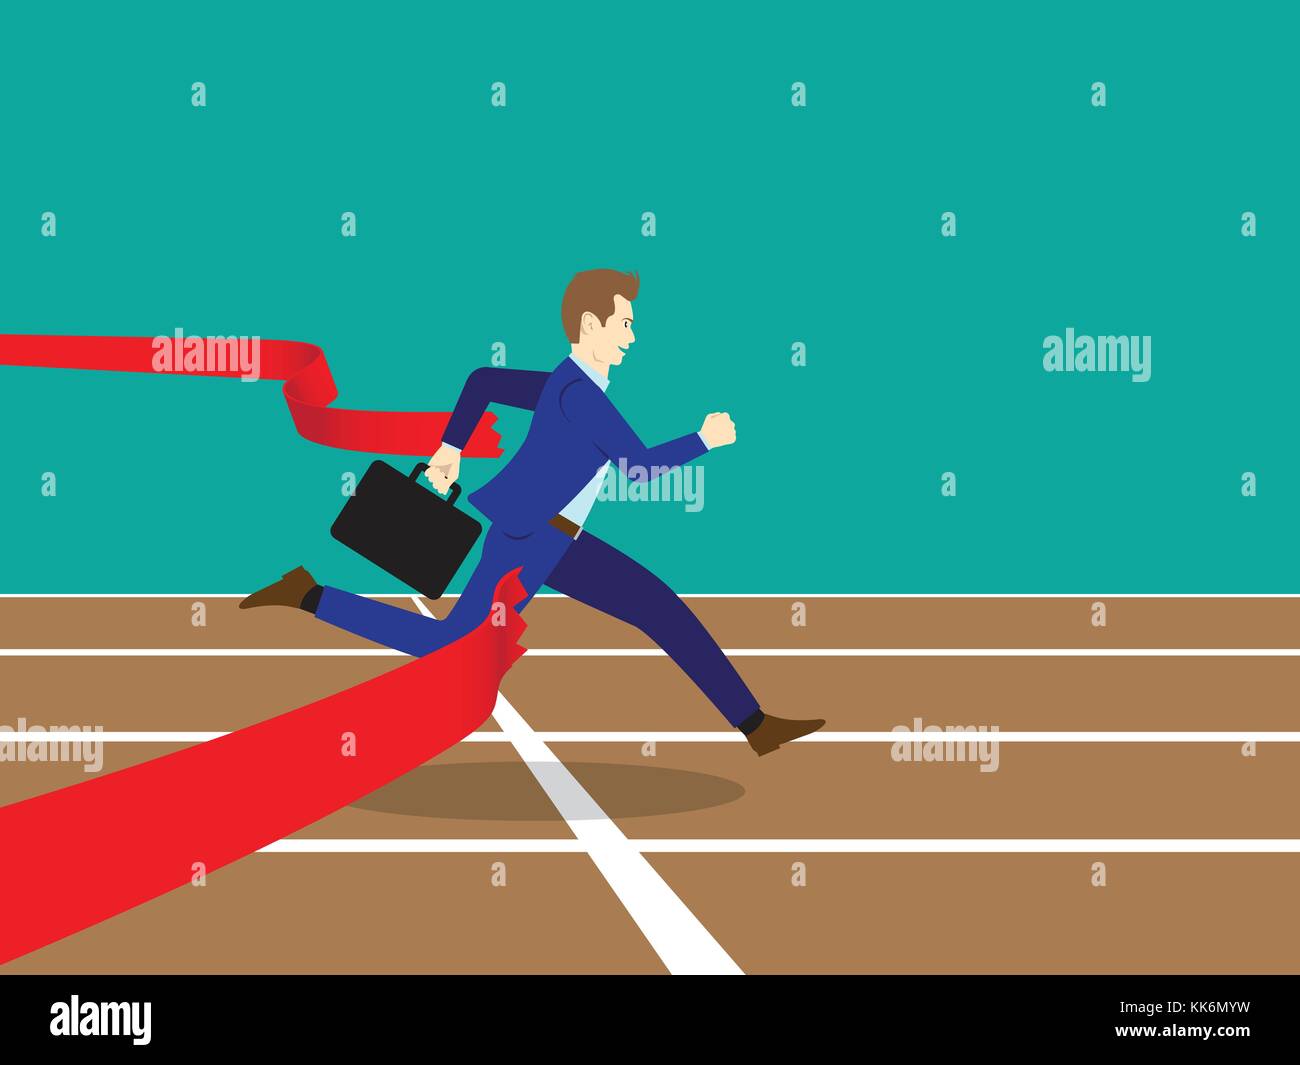 Business Concept As A Full-Energy Businessman Running On Track To Get Through Red Ribbon As Finish Line Means Performing The Best Effort To Succeed. Stock Vector